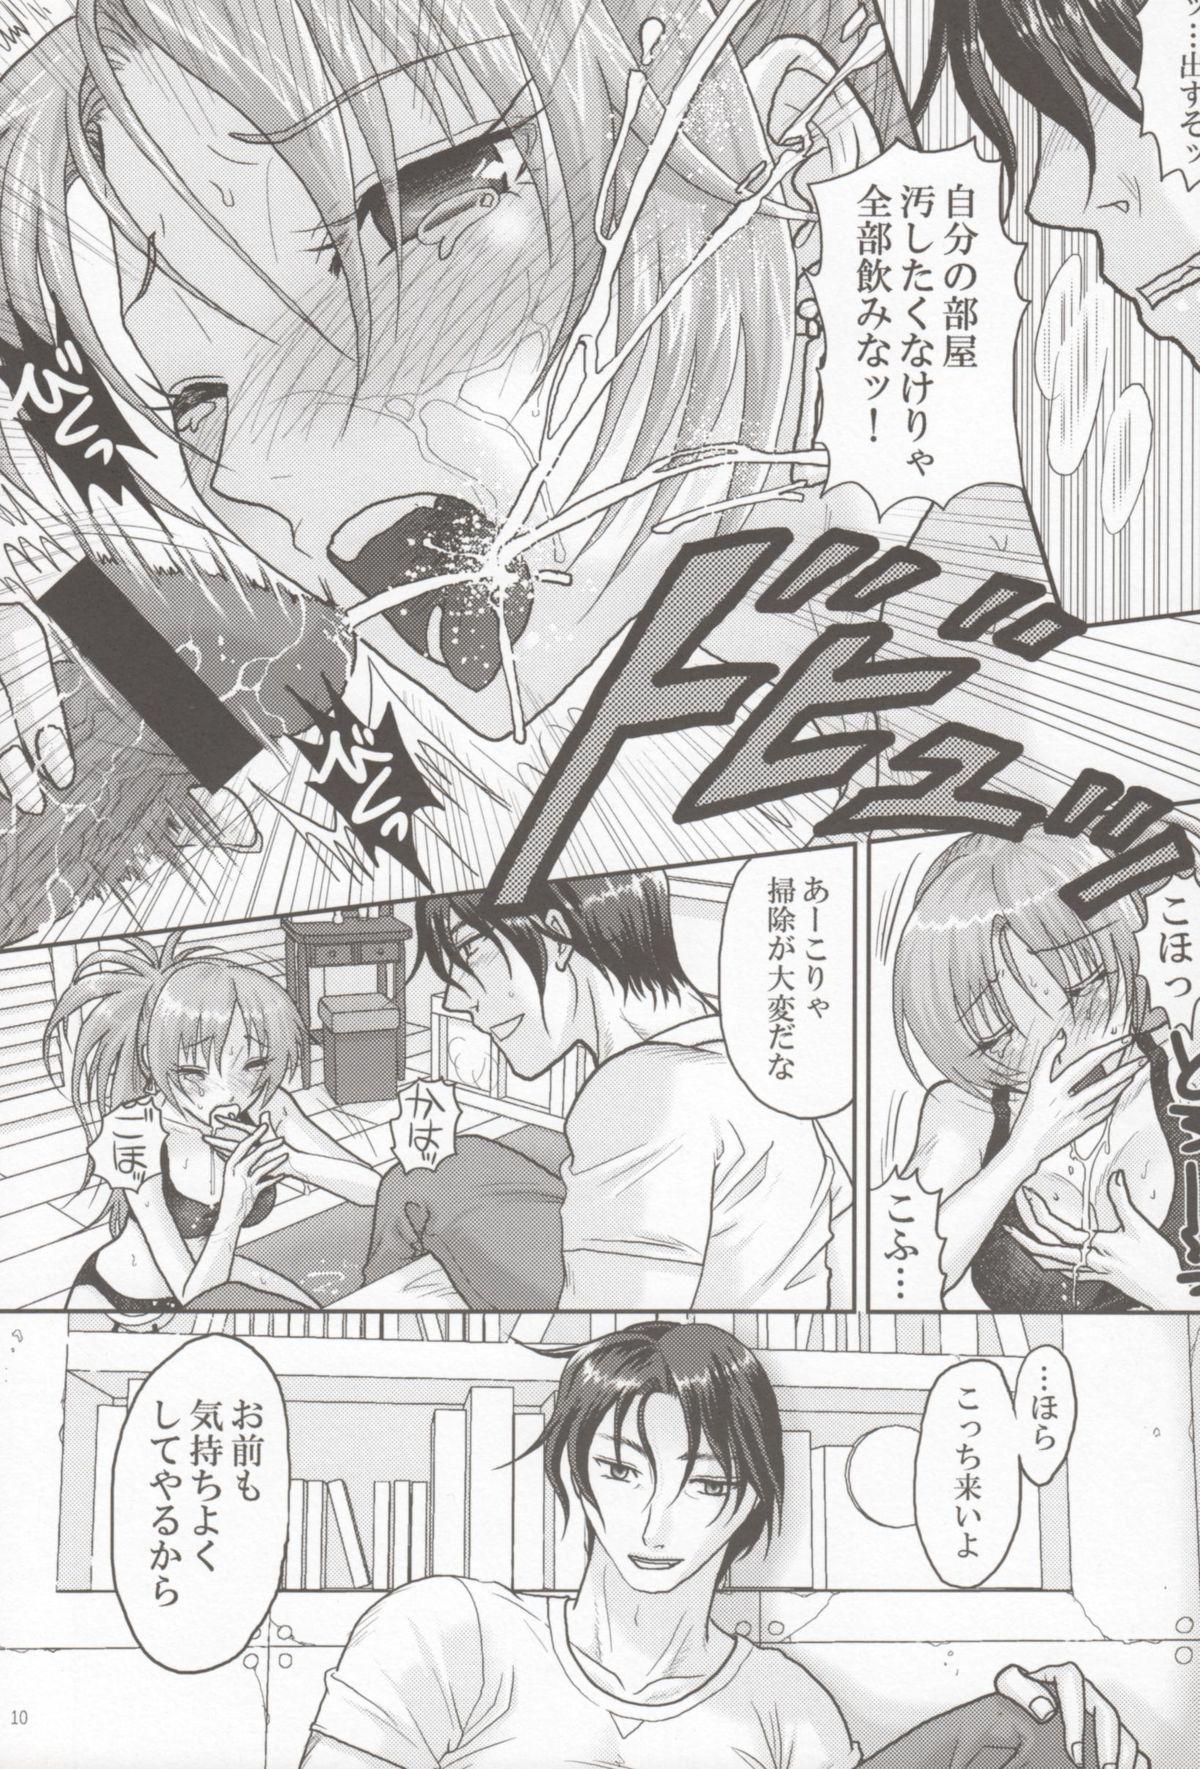 Ethnic nymphomania 5 - King of fighters Leite - Page 8